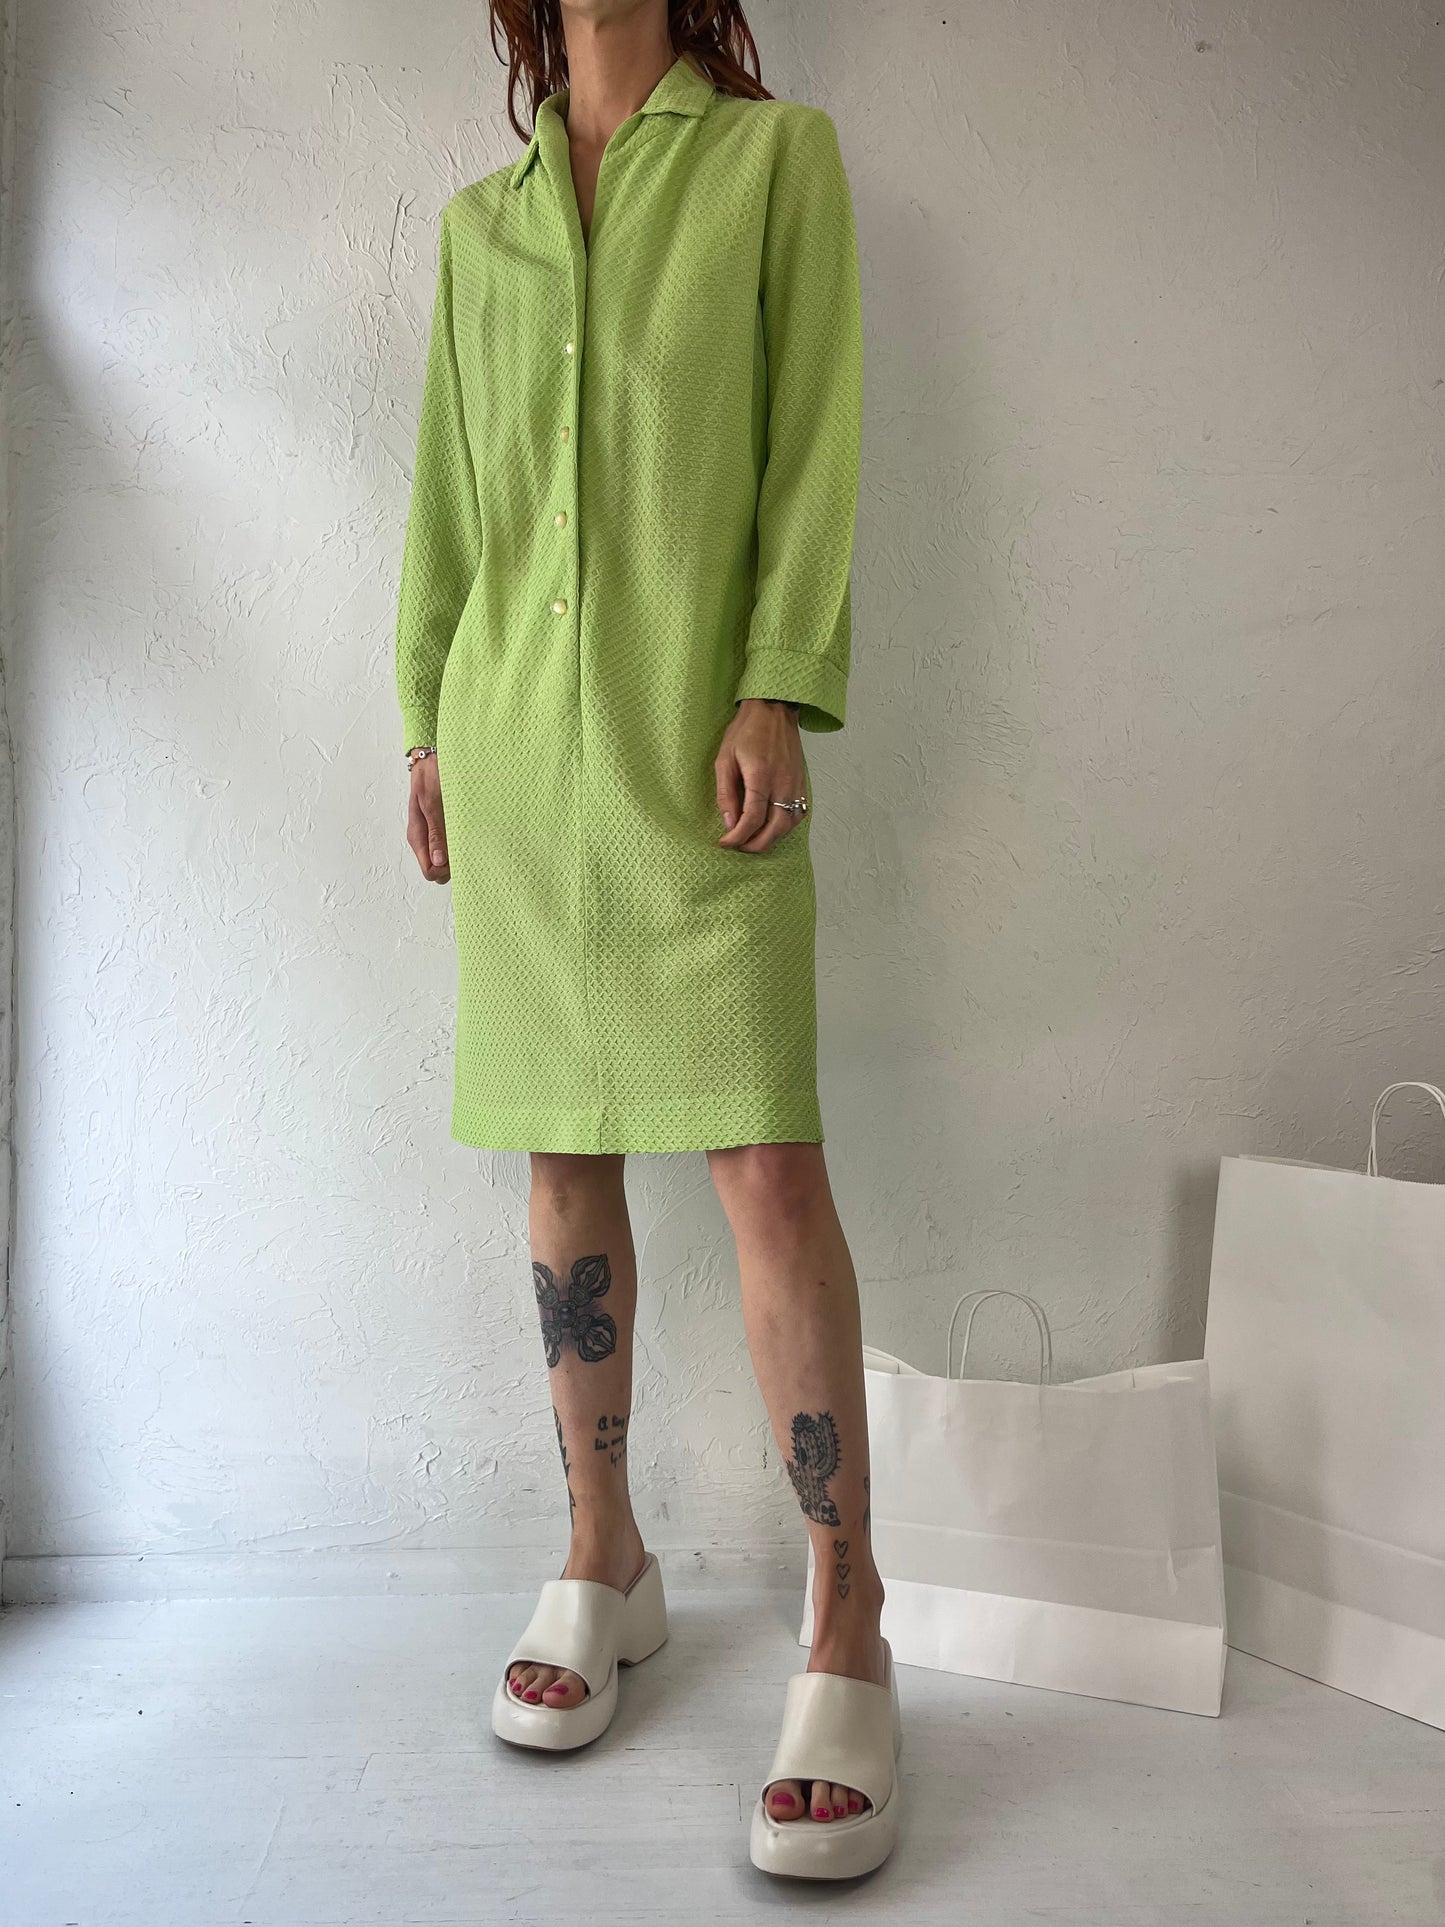 Y2K 'Giselle' Lime Green Collared Dress / Medium